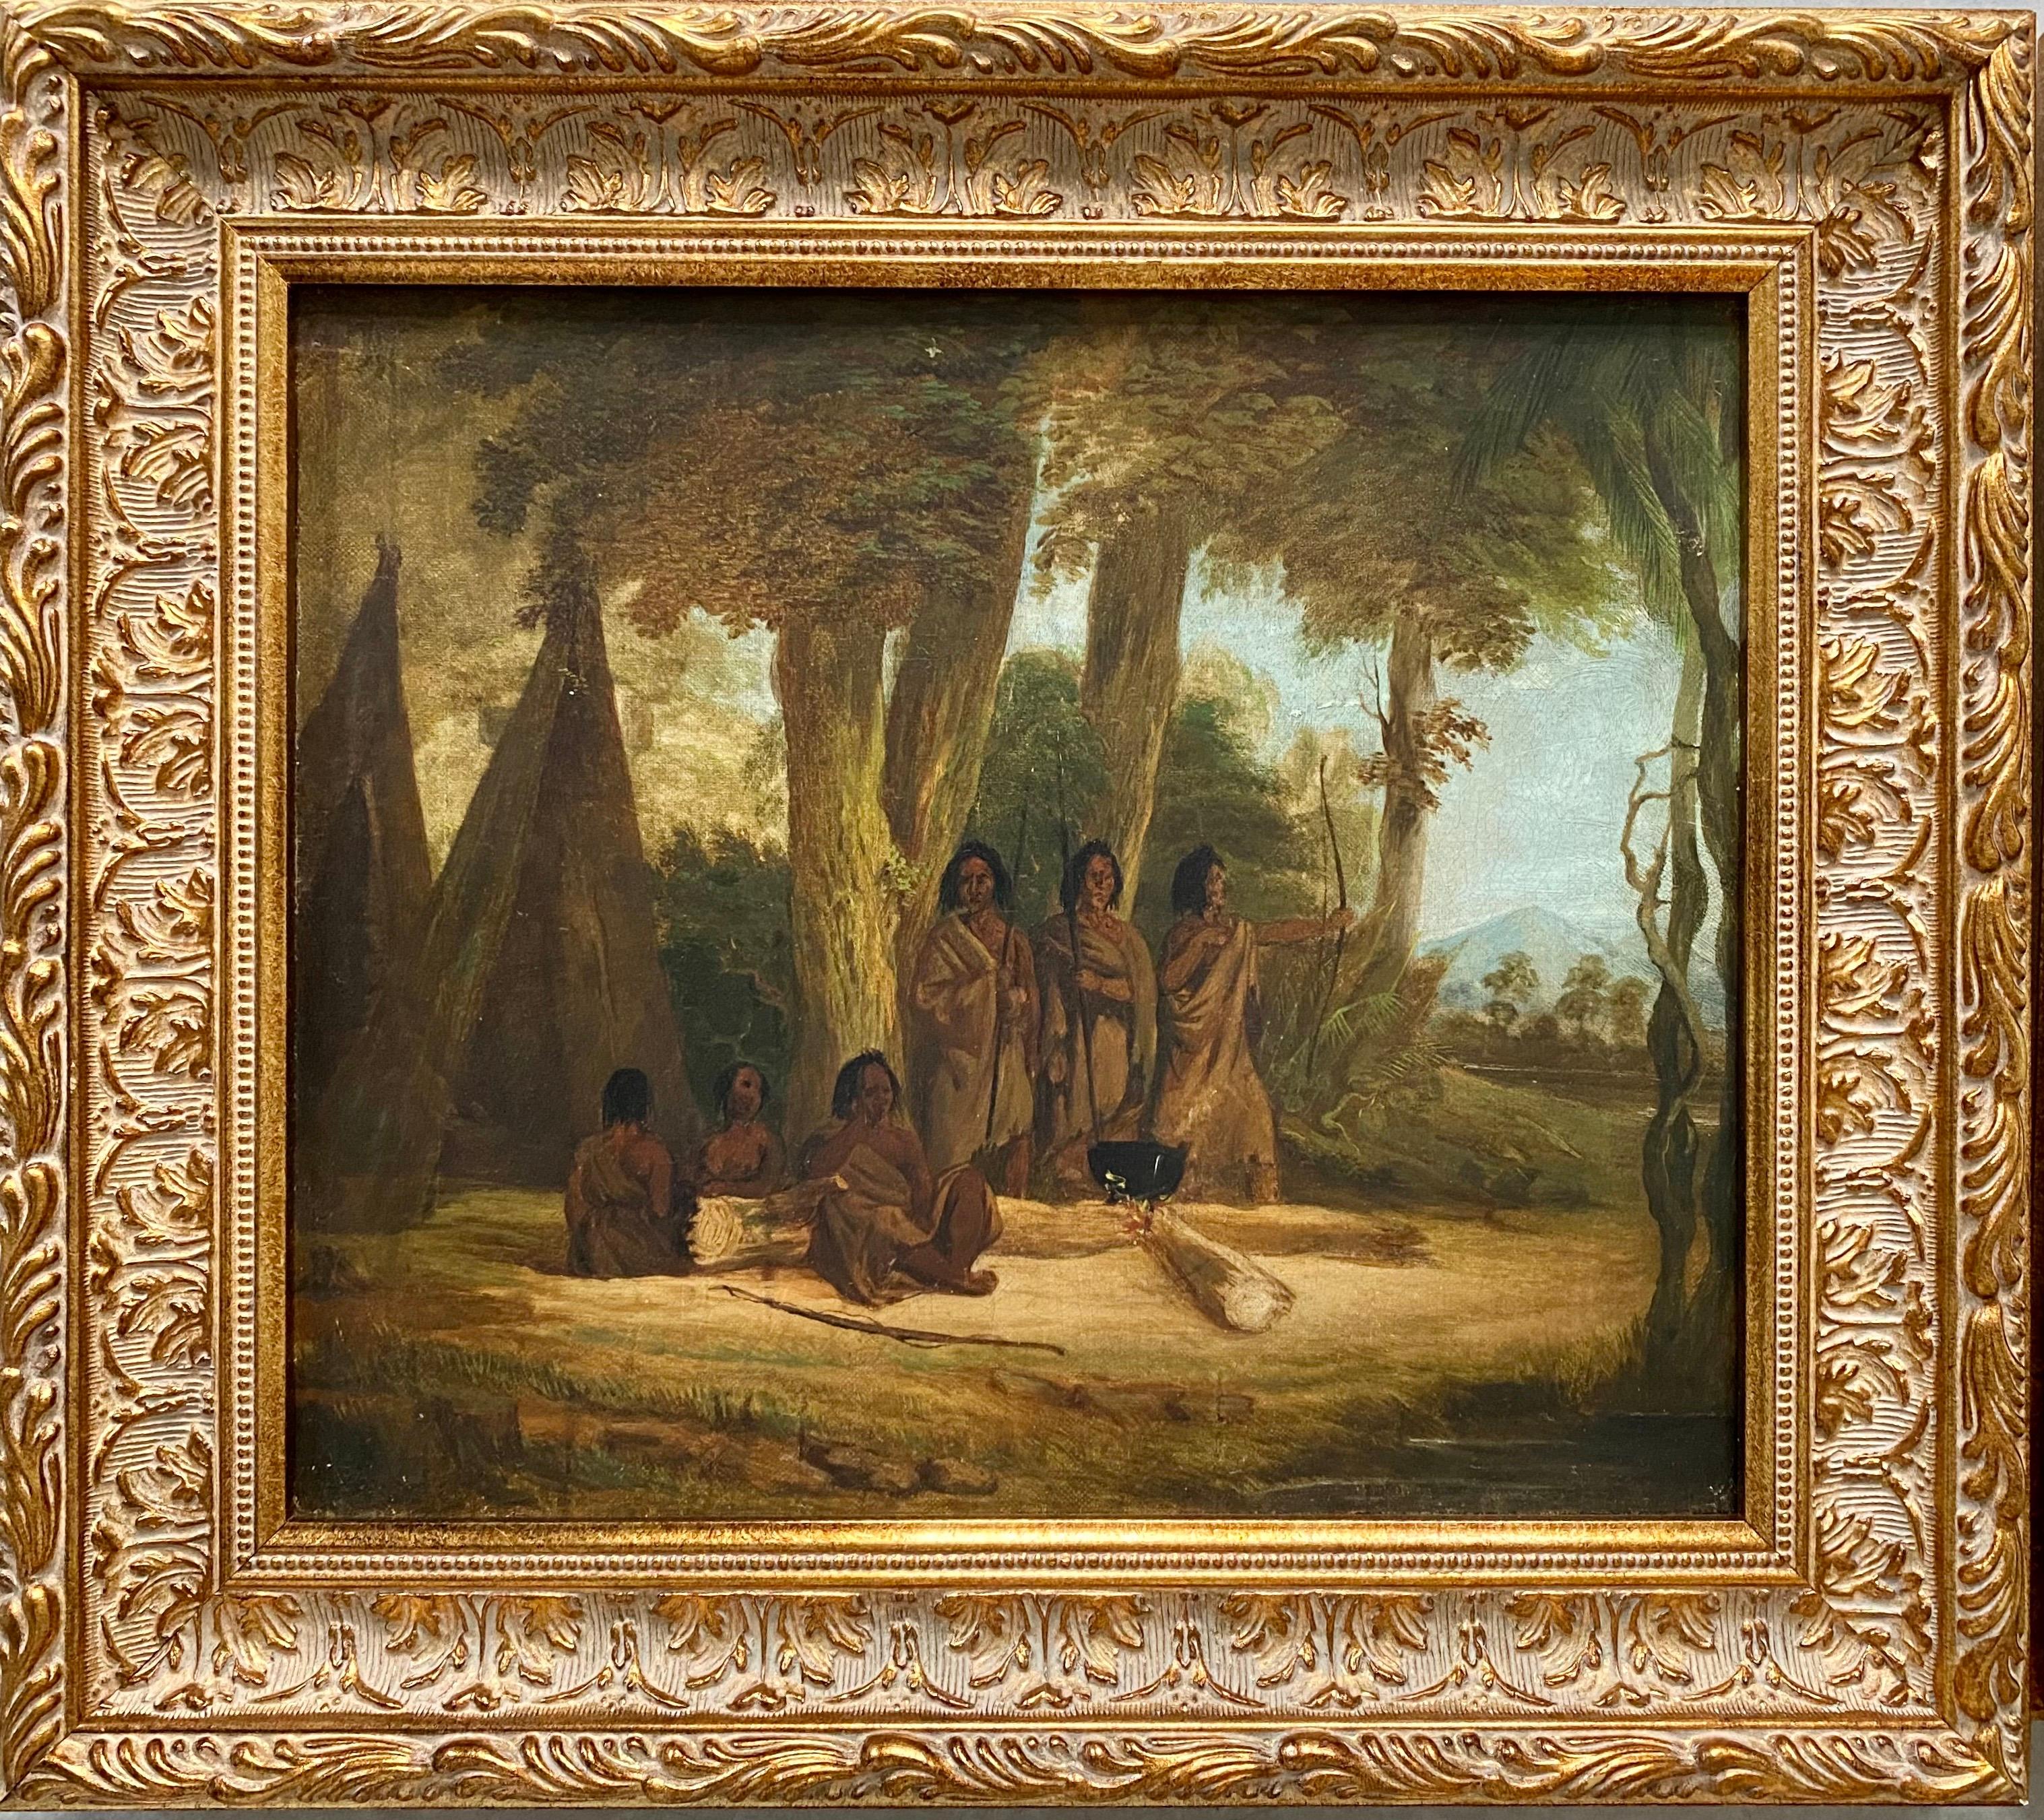 19th century painting of Native Americans - Historical Genre America Wigwam